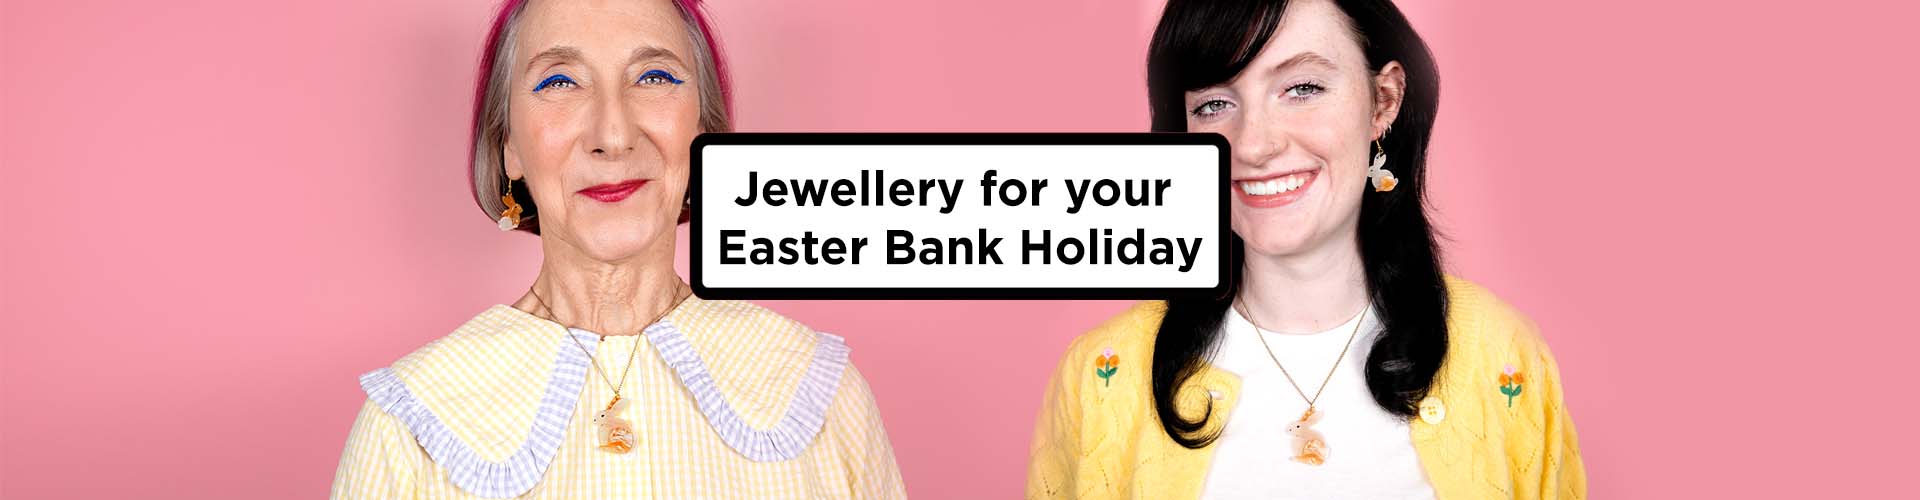 Jewellery for your Easter Bank Holiday